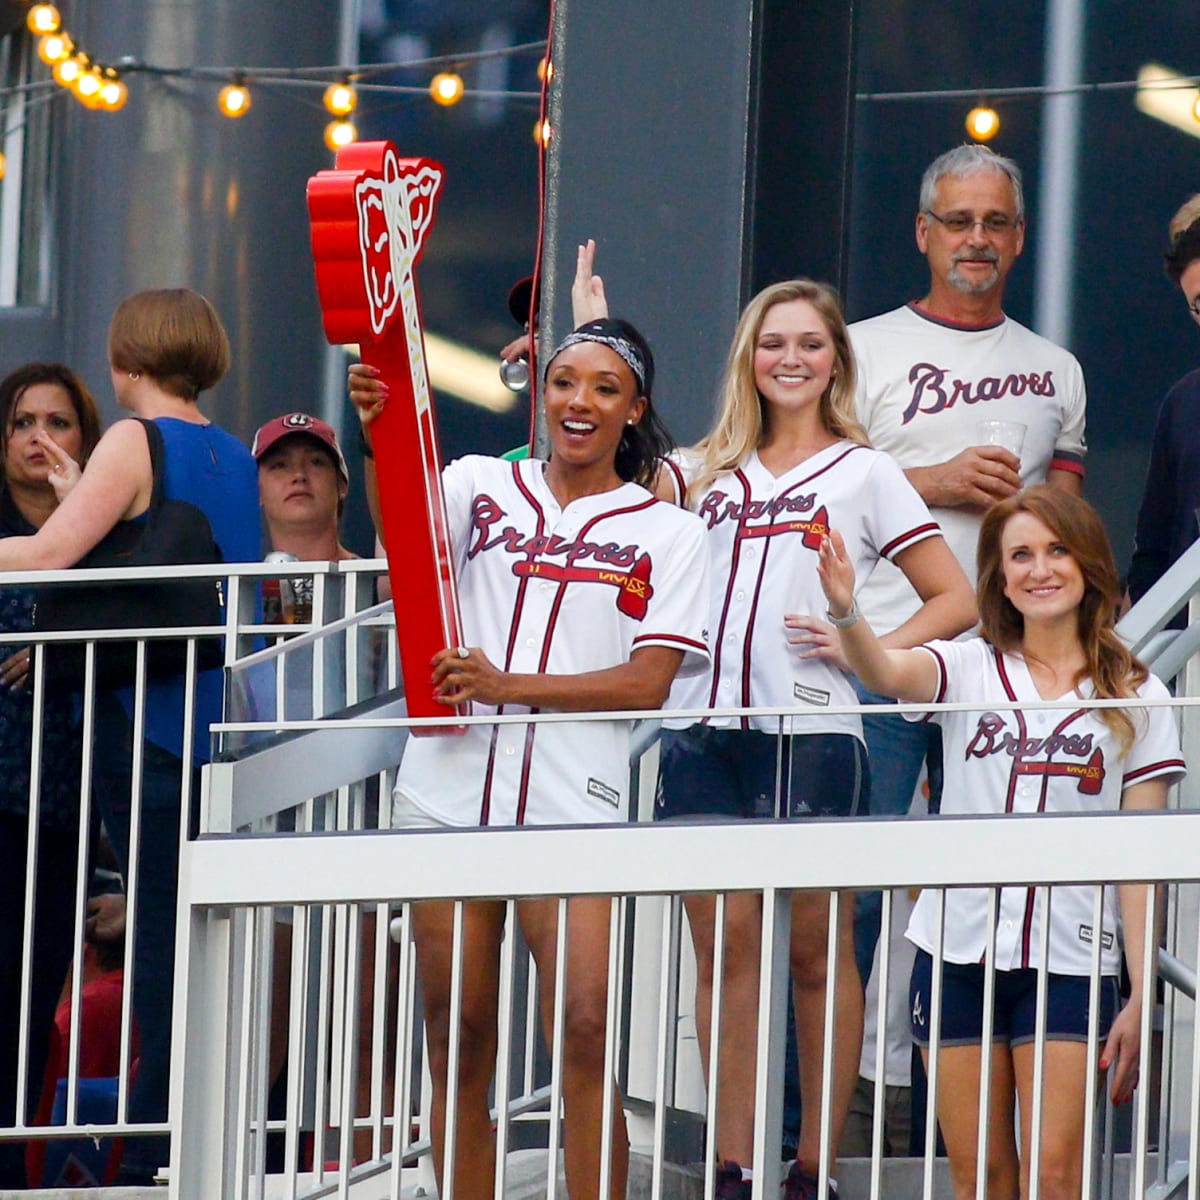 Braves to reduce use of tomahawk chop out of respect for Native